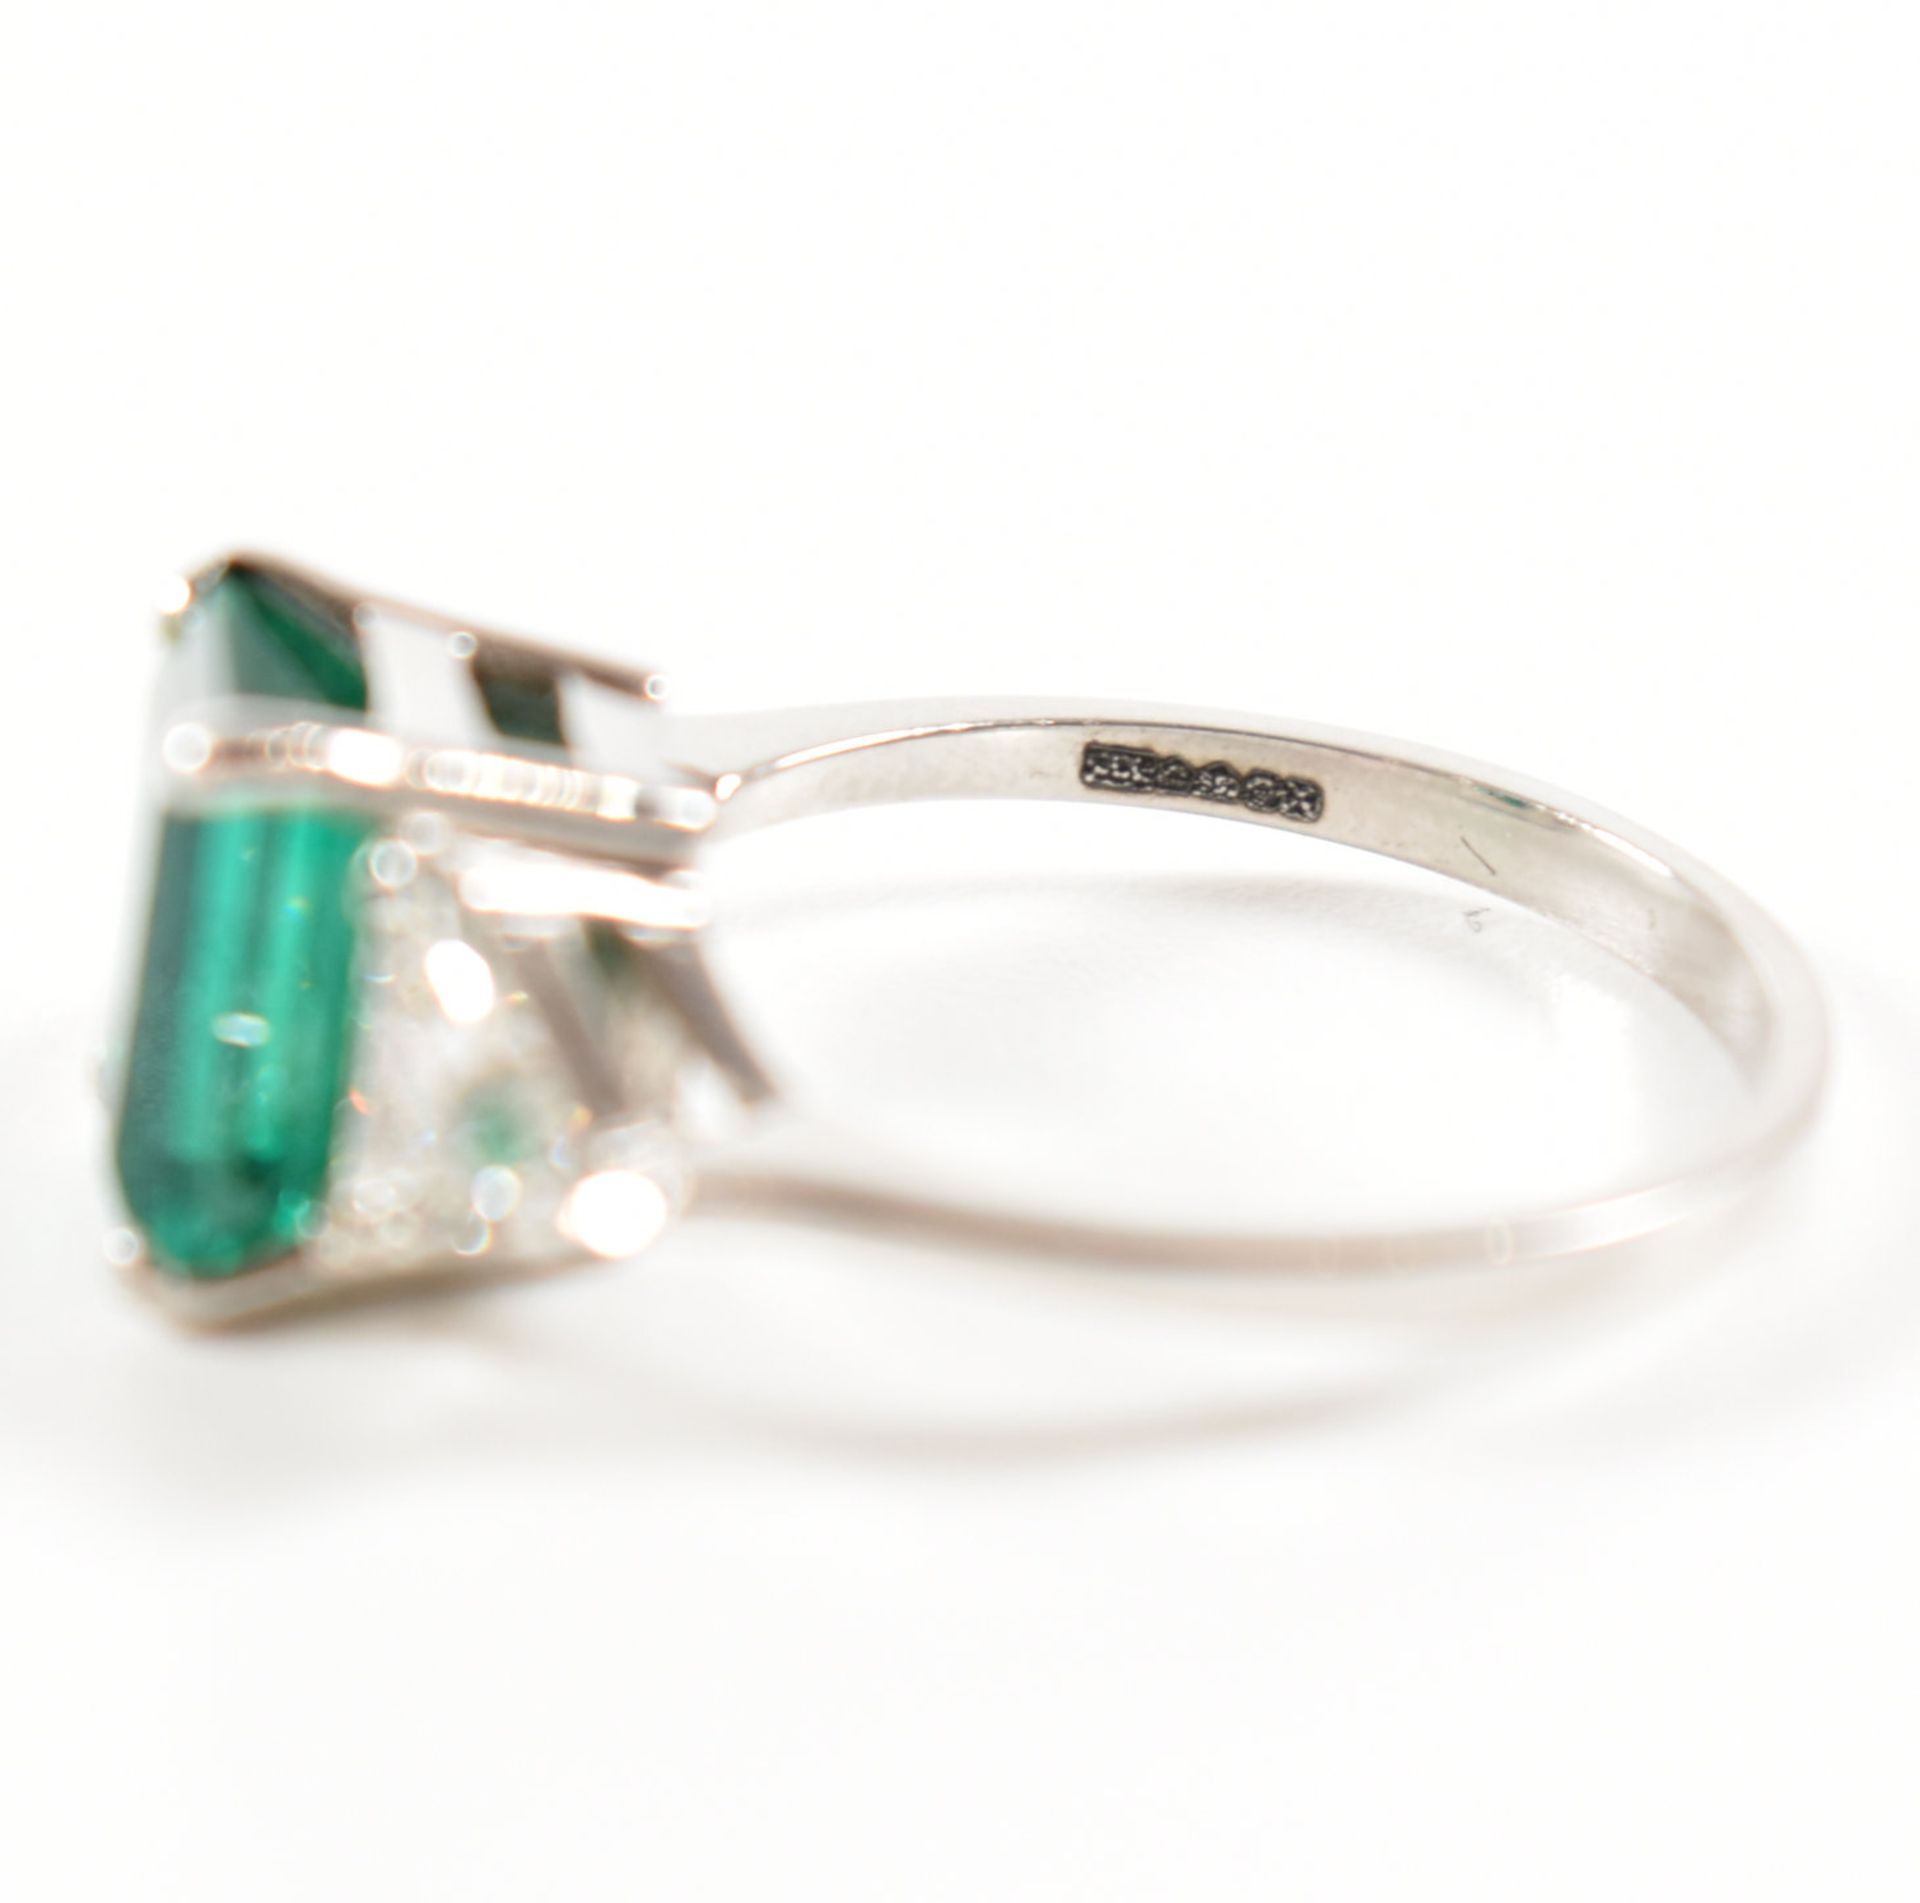 18CT WHITE GOLD COLOMBIAN EMERALD & DIAMOND RING - Image 10 of 19